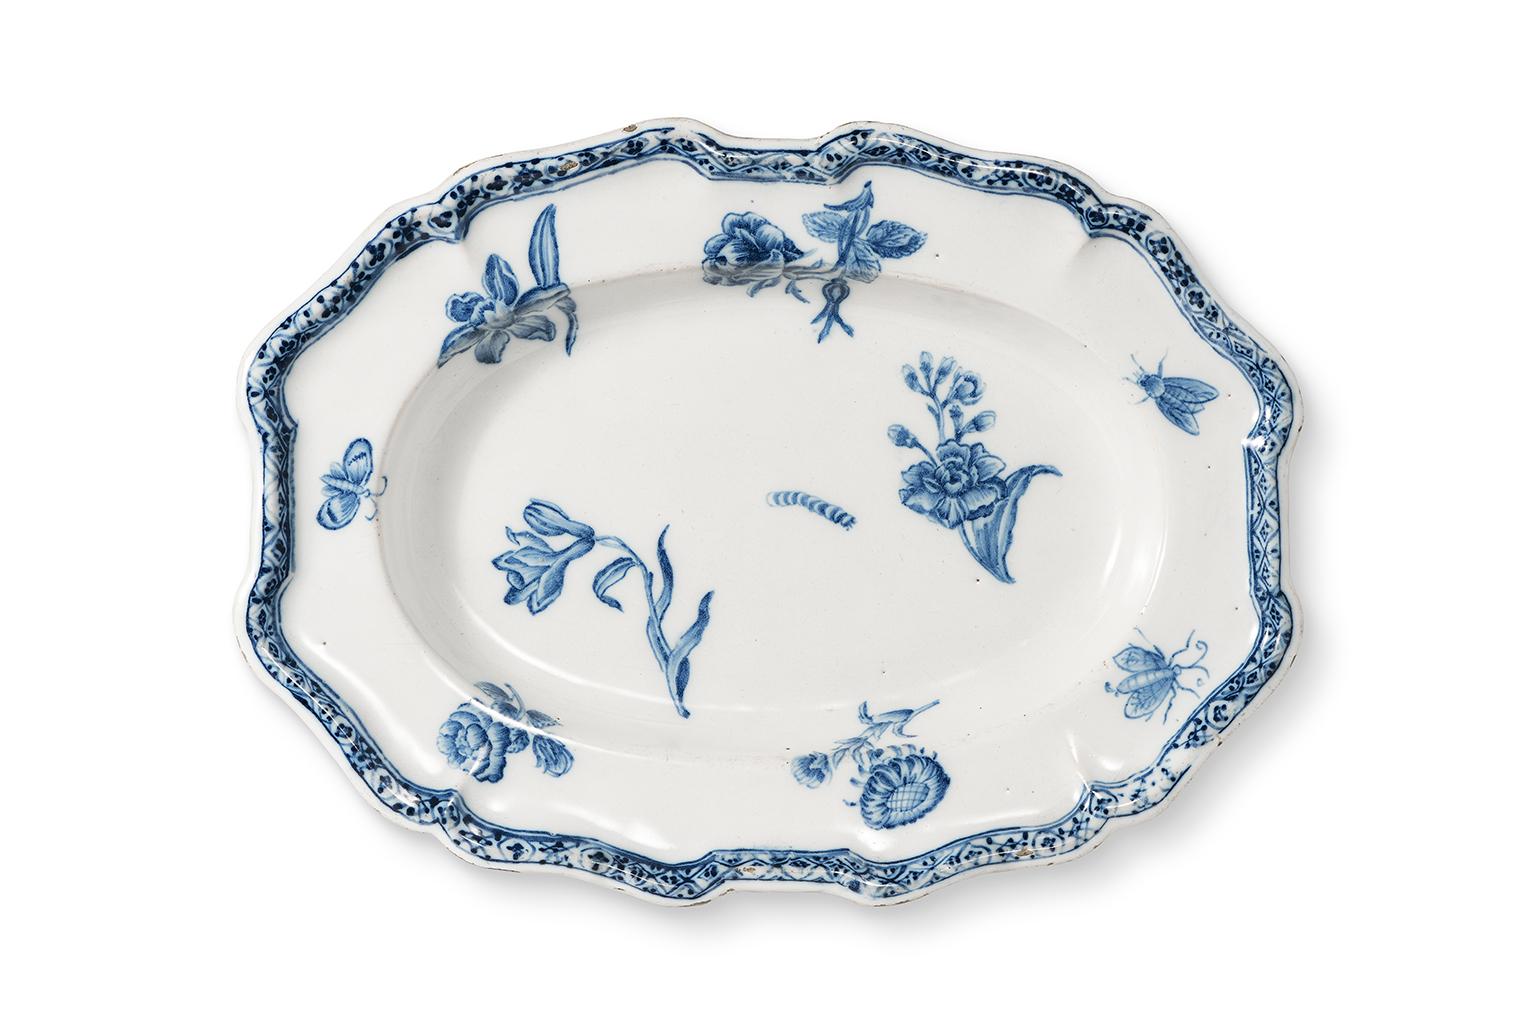 Oval tray
Giorgio Giacinto Rossetti Manufacture
Turin or Lodi, Circa 1737
High fire blue monochrome maiolica
It measures: 12.12 in x 8.97 x 1.37 (30.8 cm x 22.8 x 3.5)
It weighs: 1.38 lb (626 g)

State of conservation: intact except for